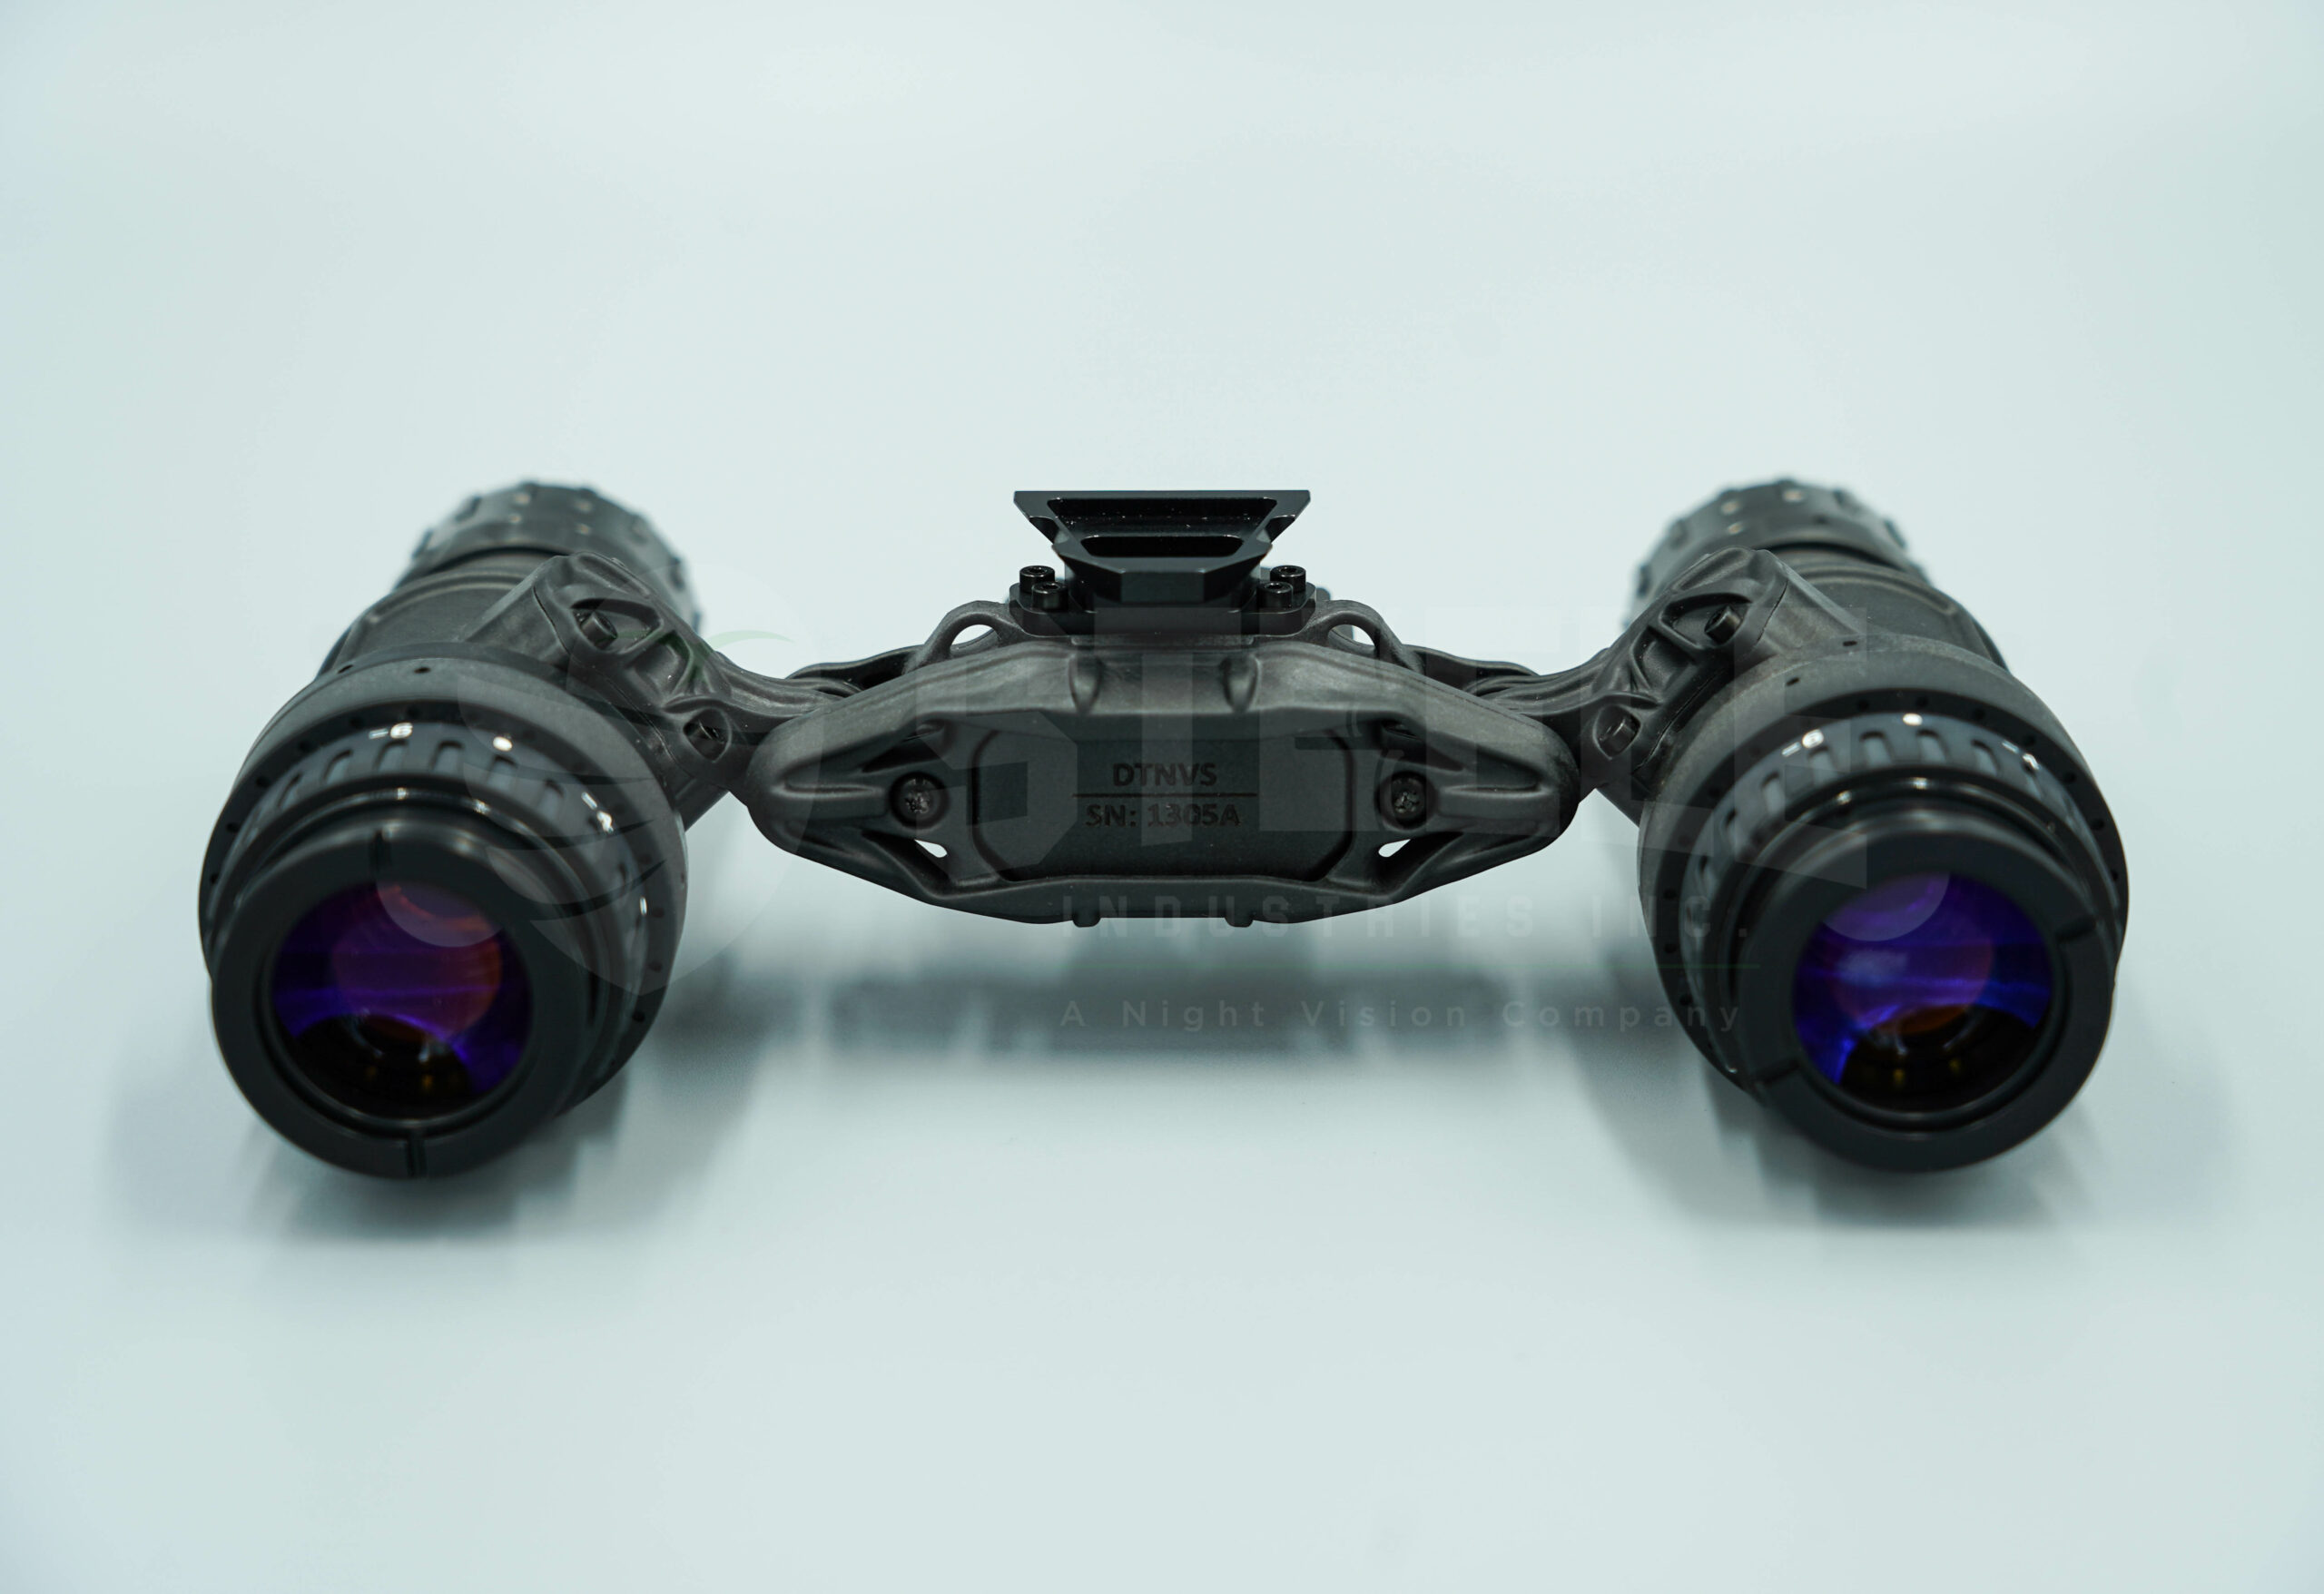 Why should you think about buying night vision goggles?